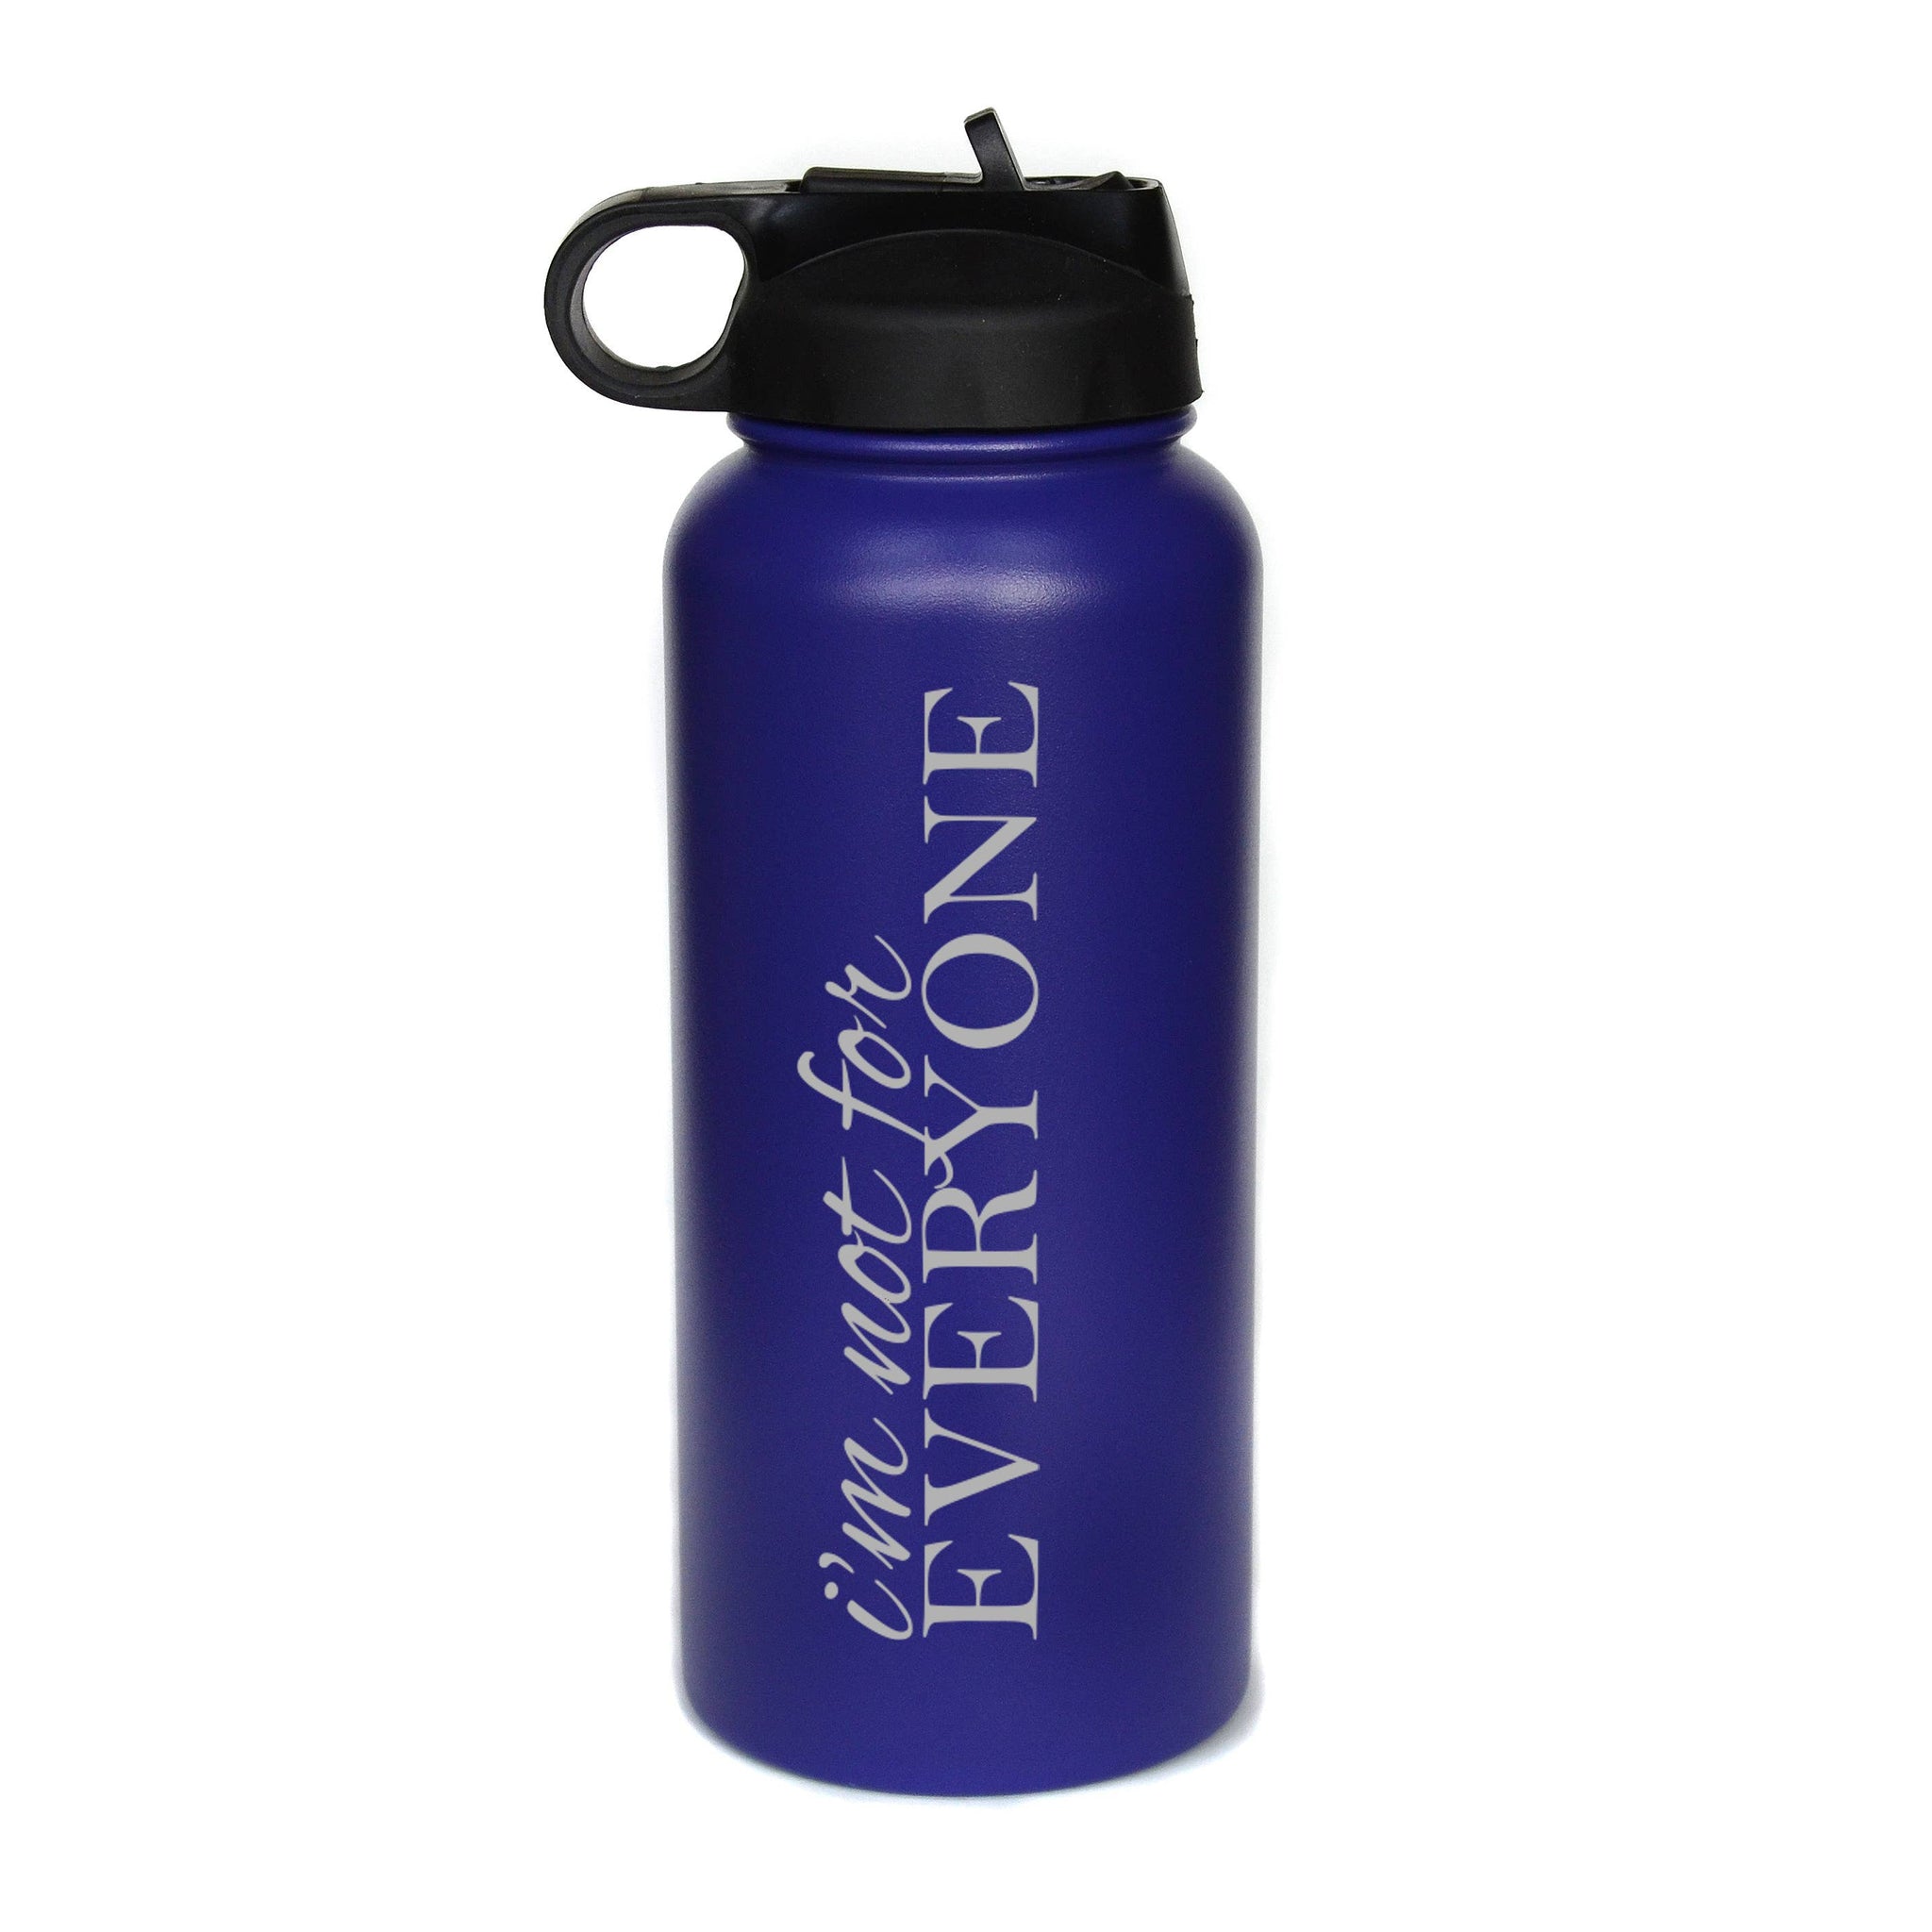 Driftless Studios - 32 oz. Engraved Water Bottle - I'm Not For Everyone